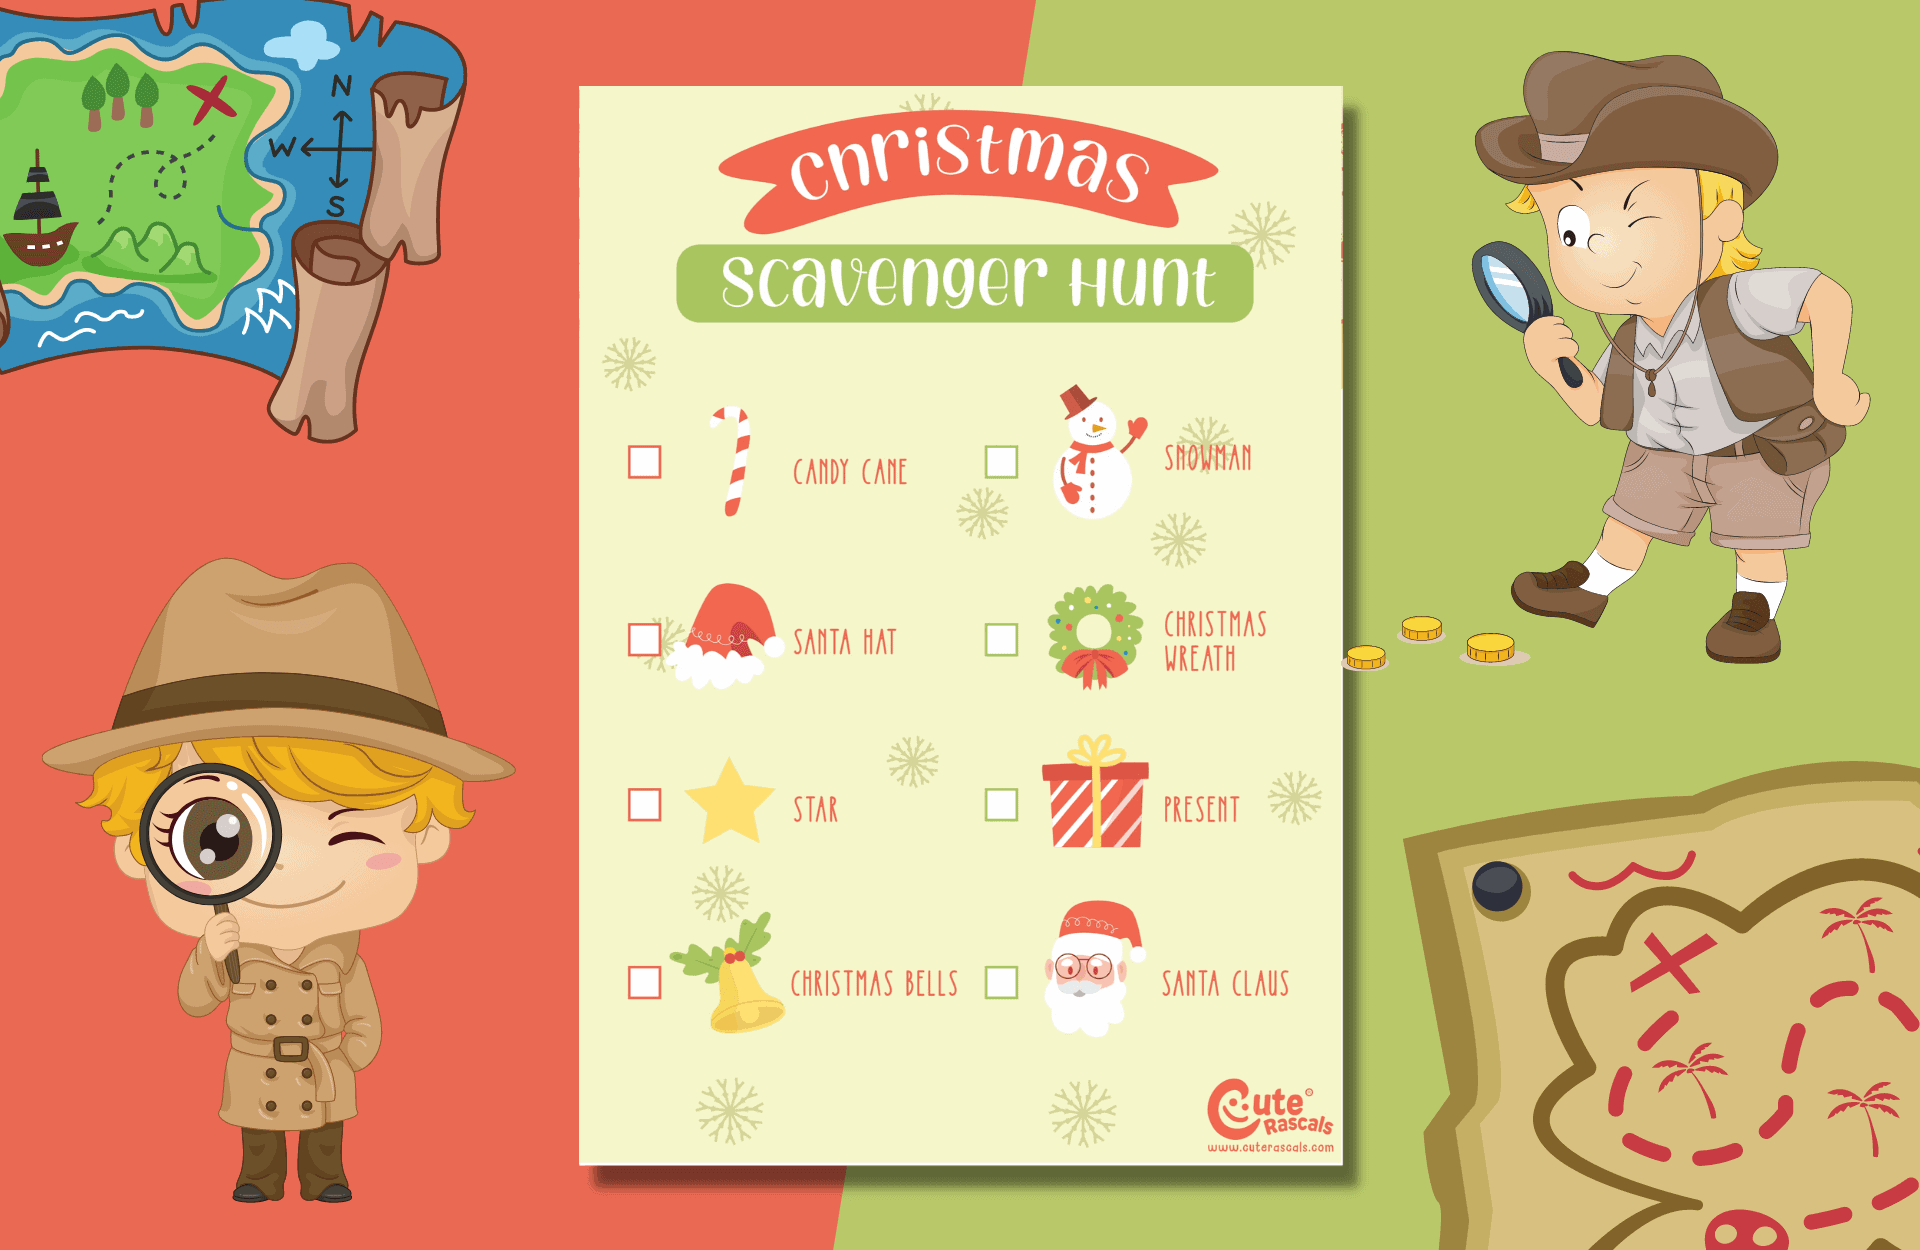 Easy! Christmas outdoor scavenger hunt for kids to enjoy in 8 clues